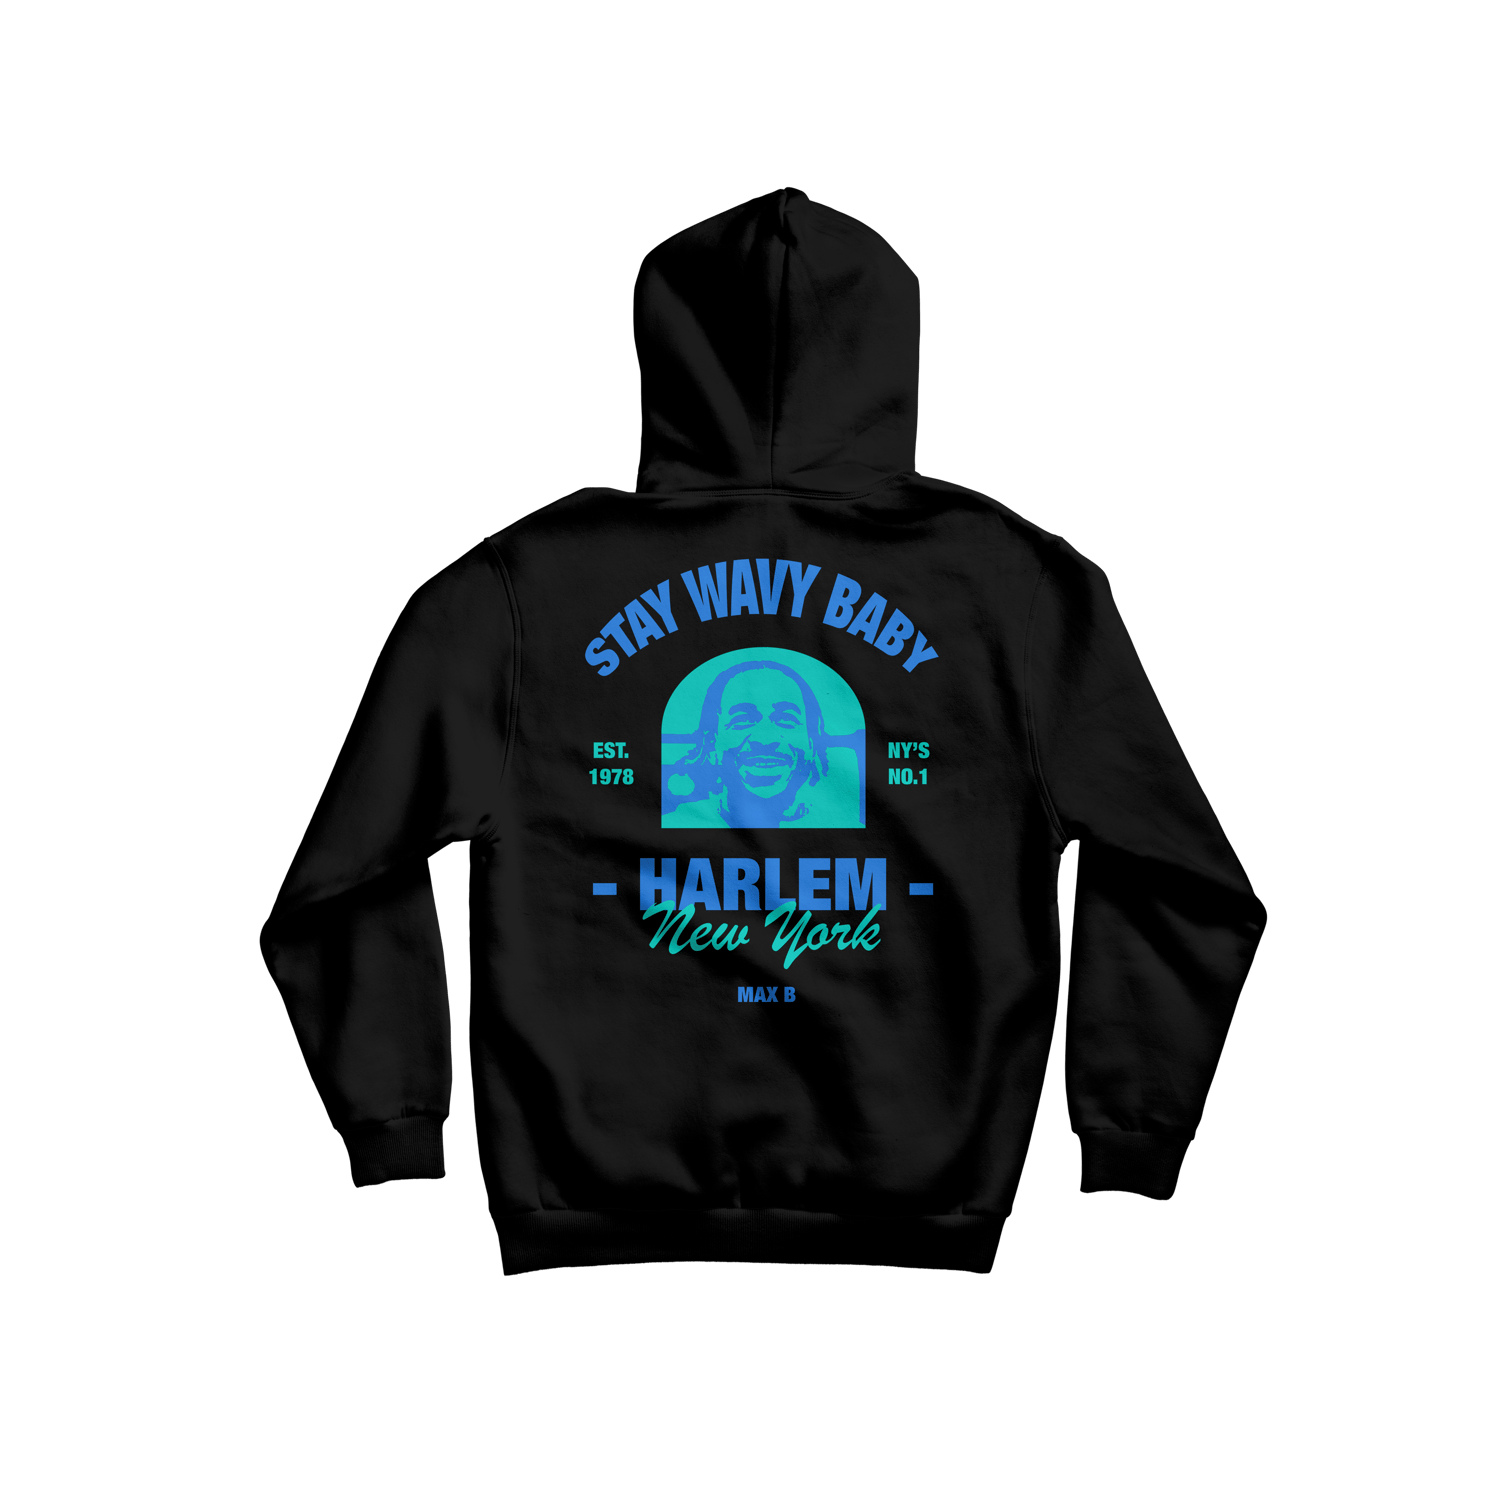 Image of Charly hoodie